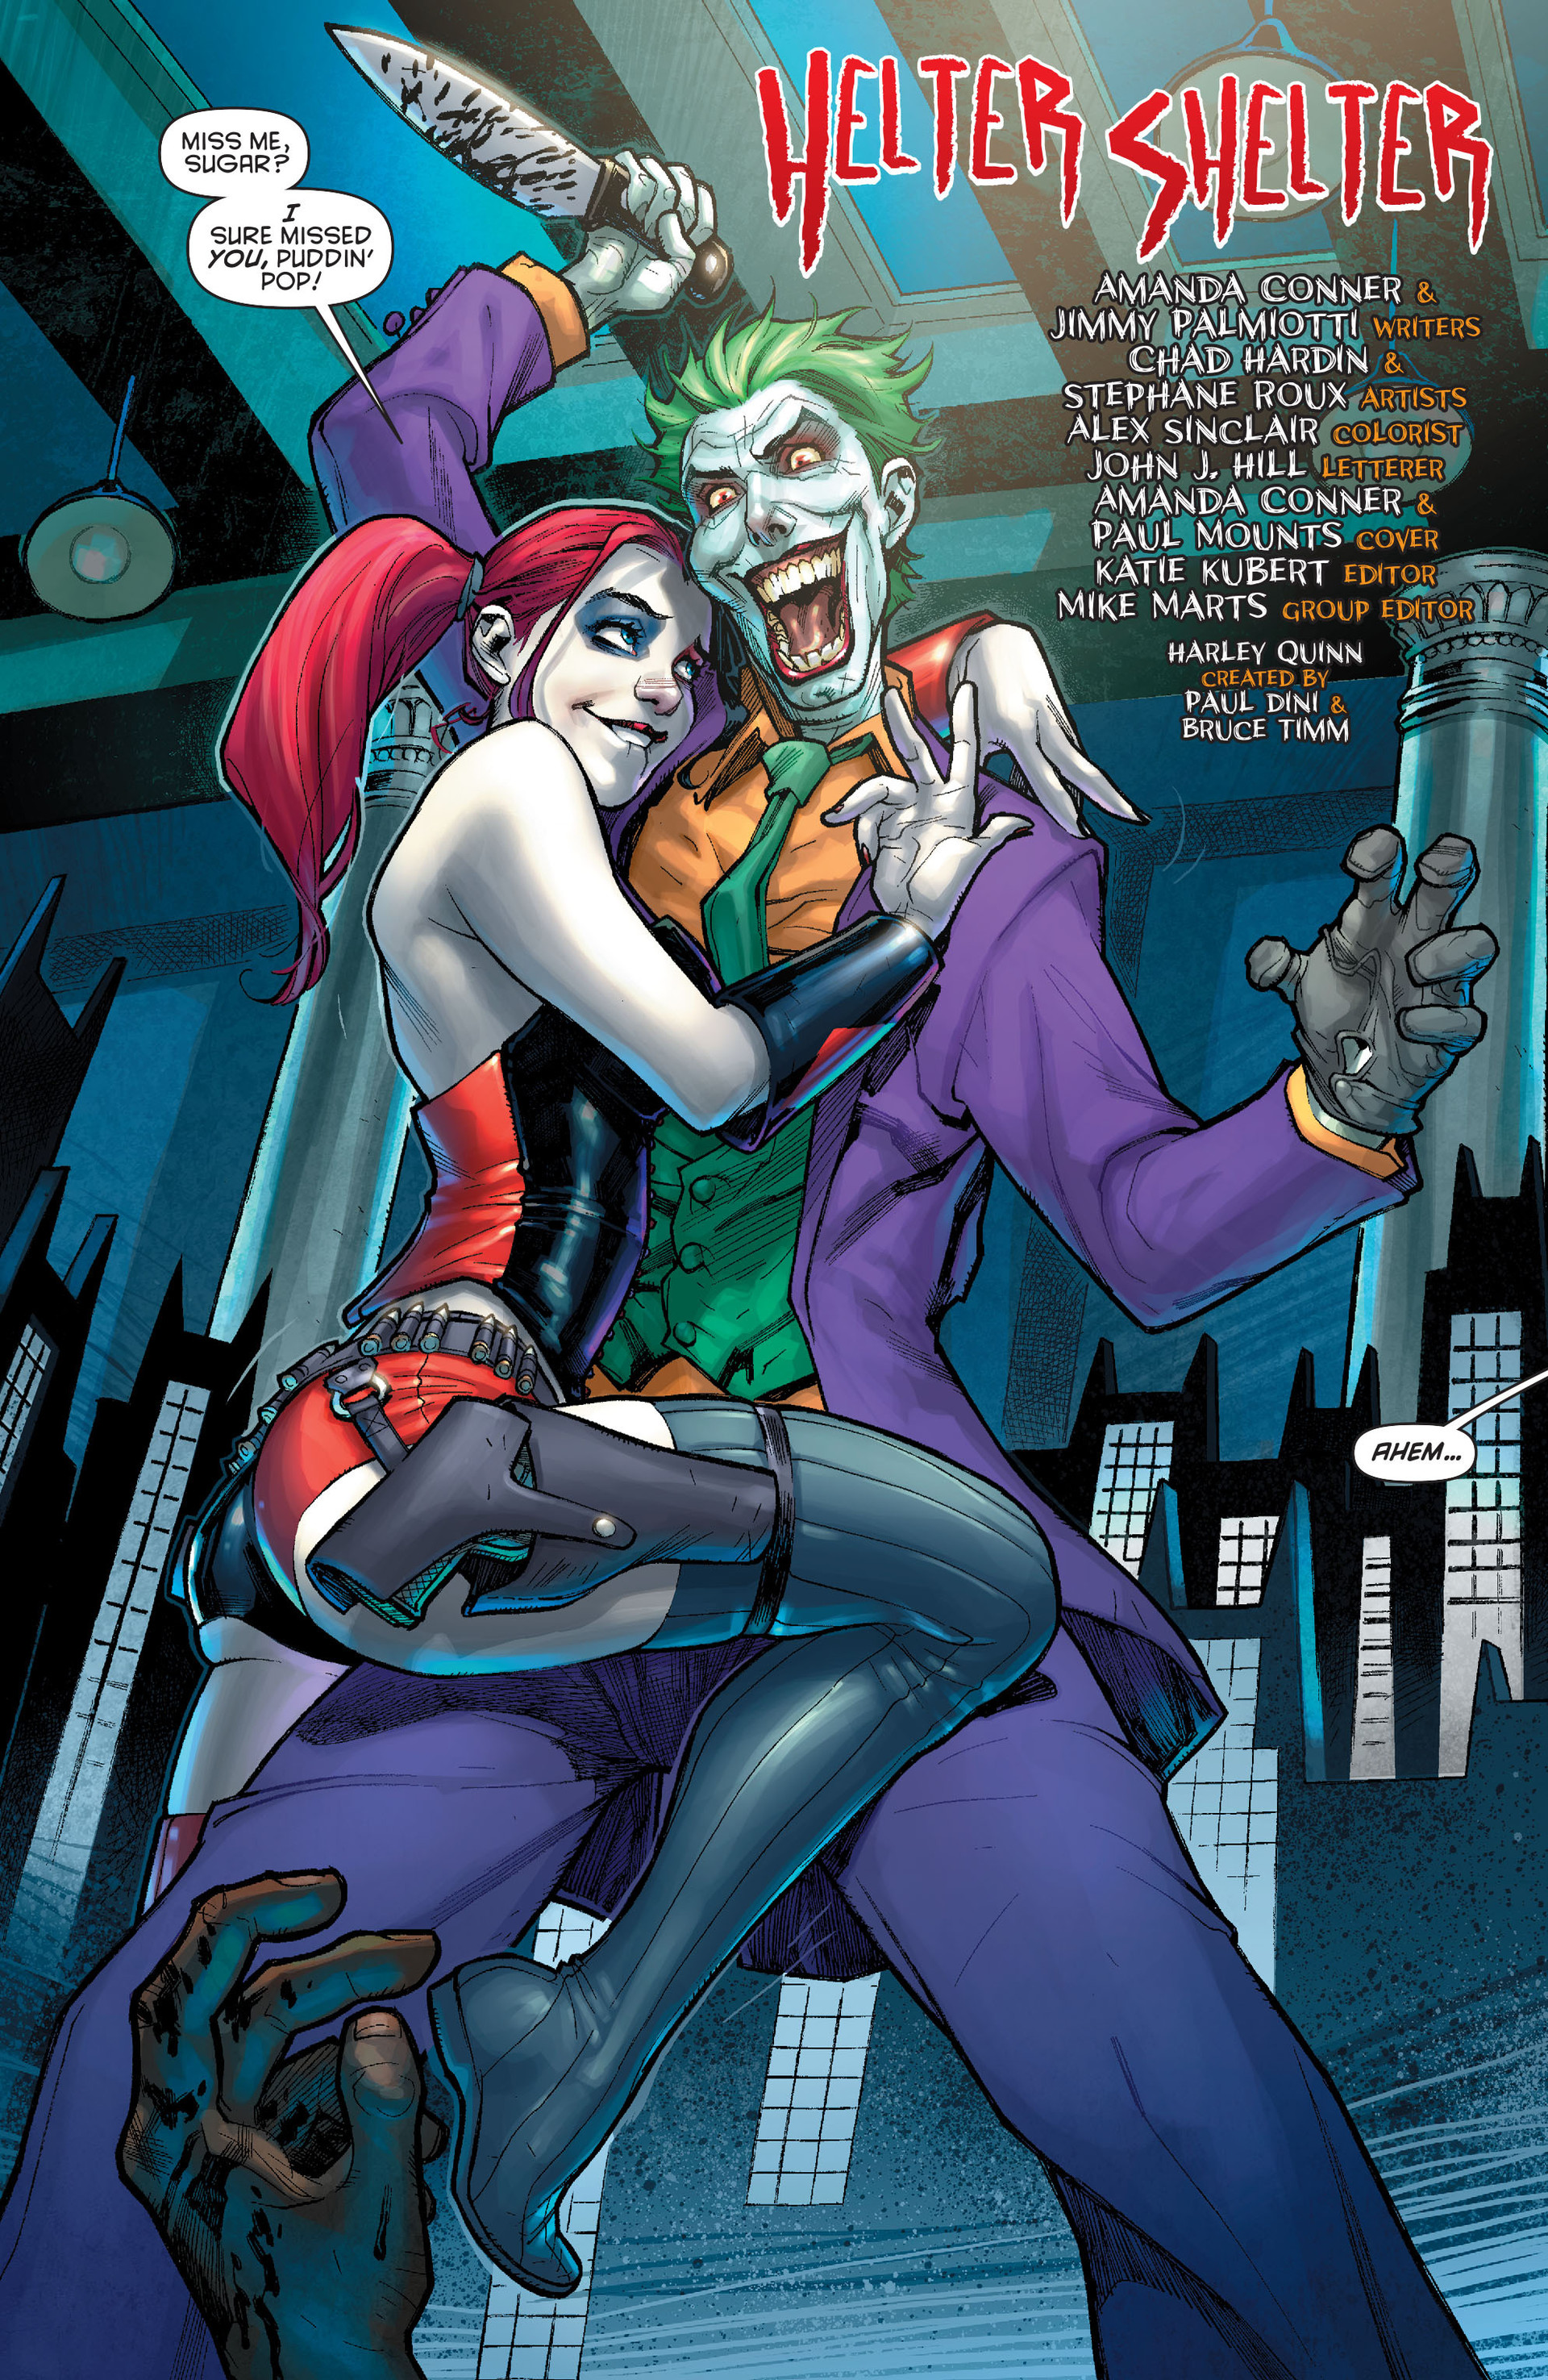 Read online Harley Quinn (2014) comic - Issue #2.